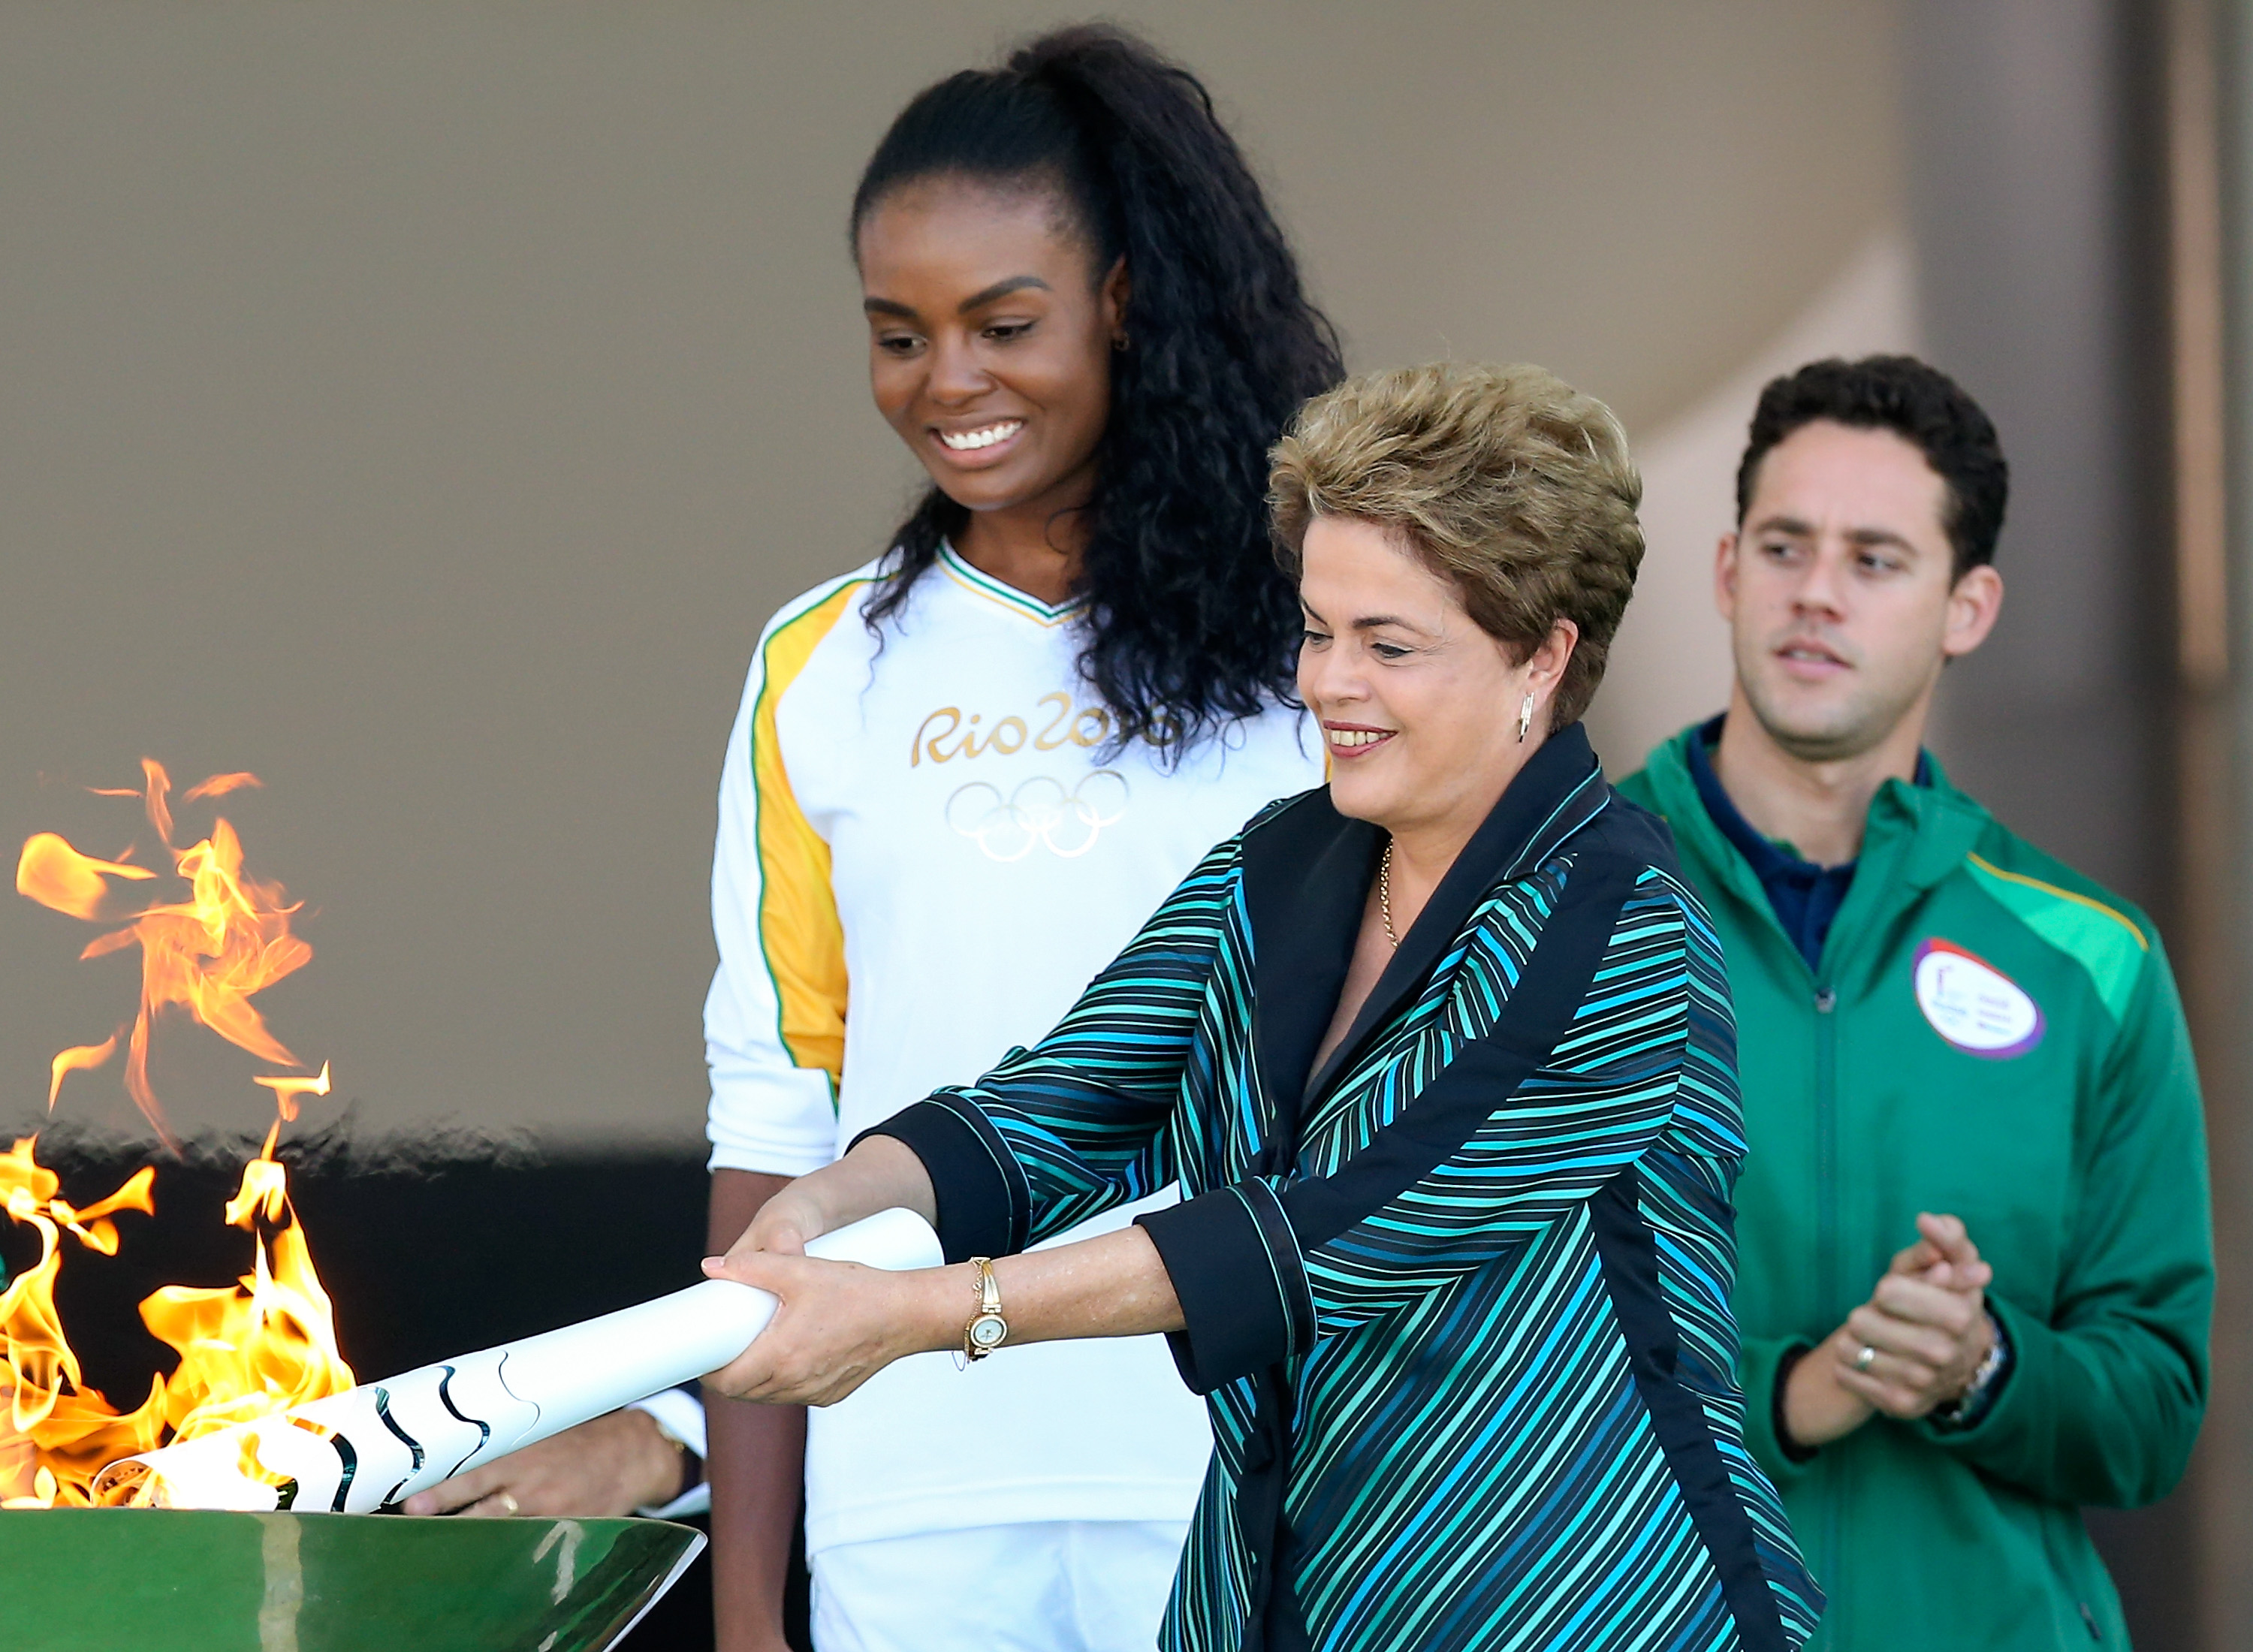 Dilma Rousseff, President of Brazil, lights the Olympic torch with the first torch bearer, volleyball player Fabiana Claudino at the Palacio do Planalto on May 3, 2016 in Brasilia, Brazil. (Buda Mendes—Getty Images)